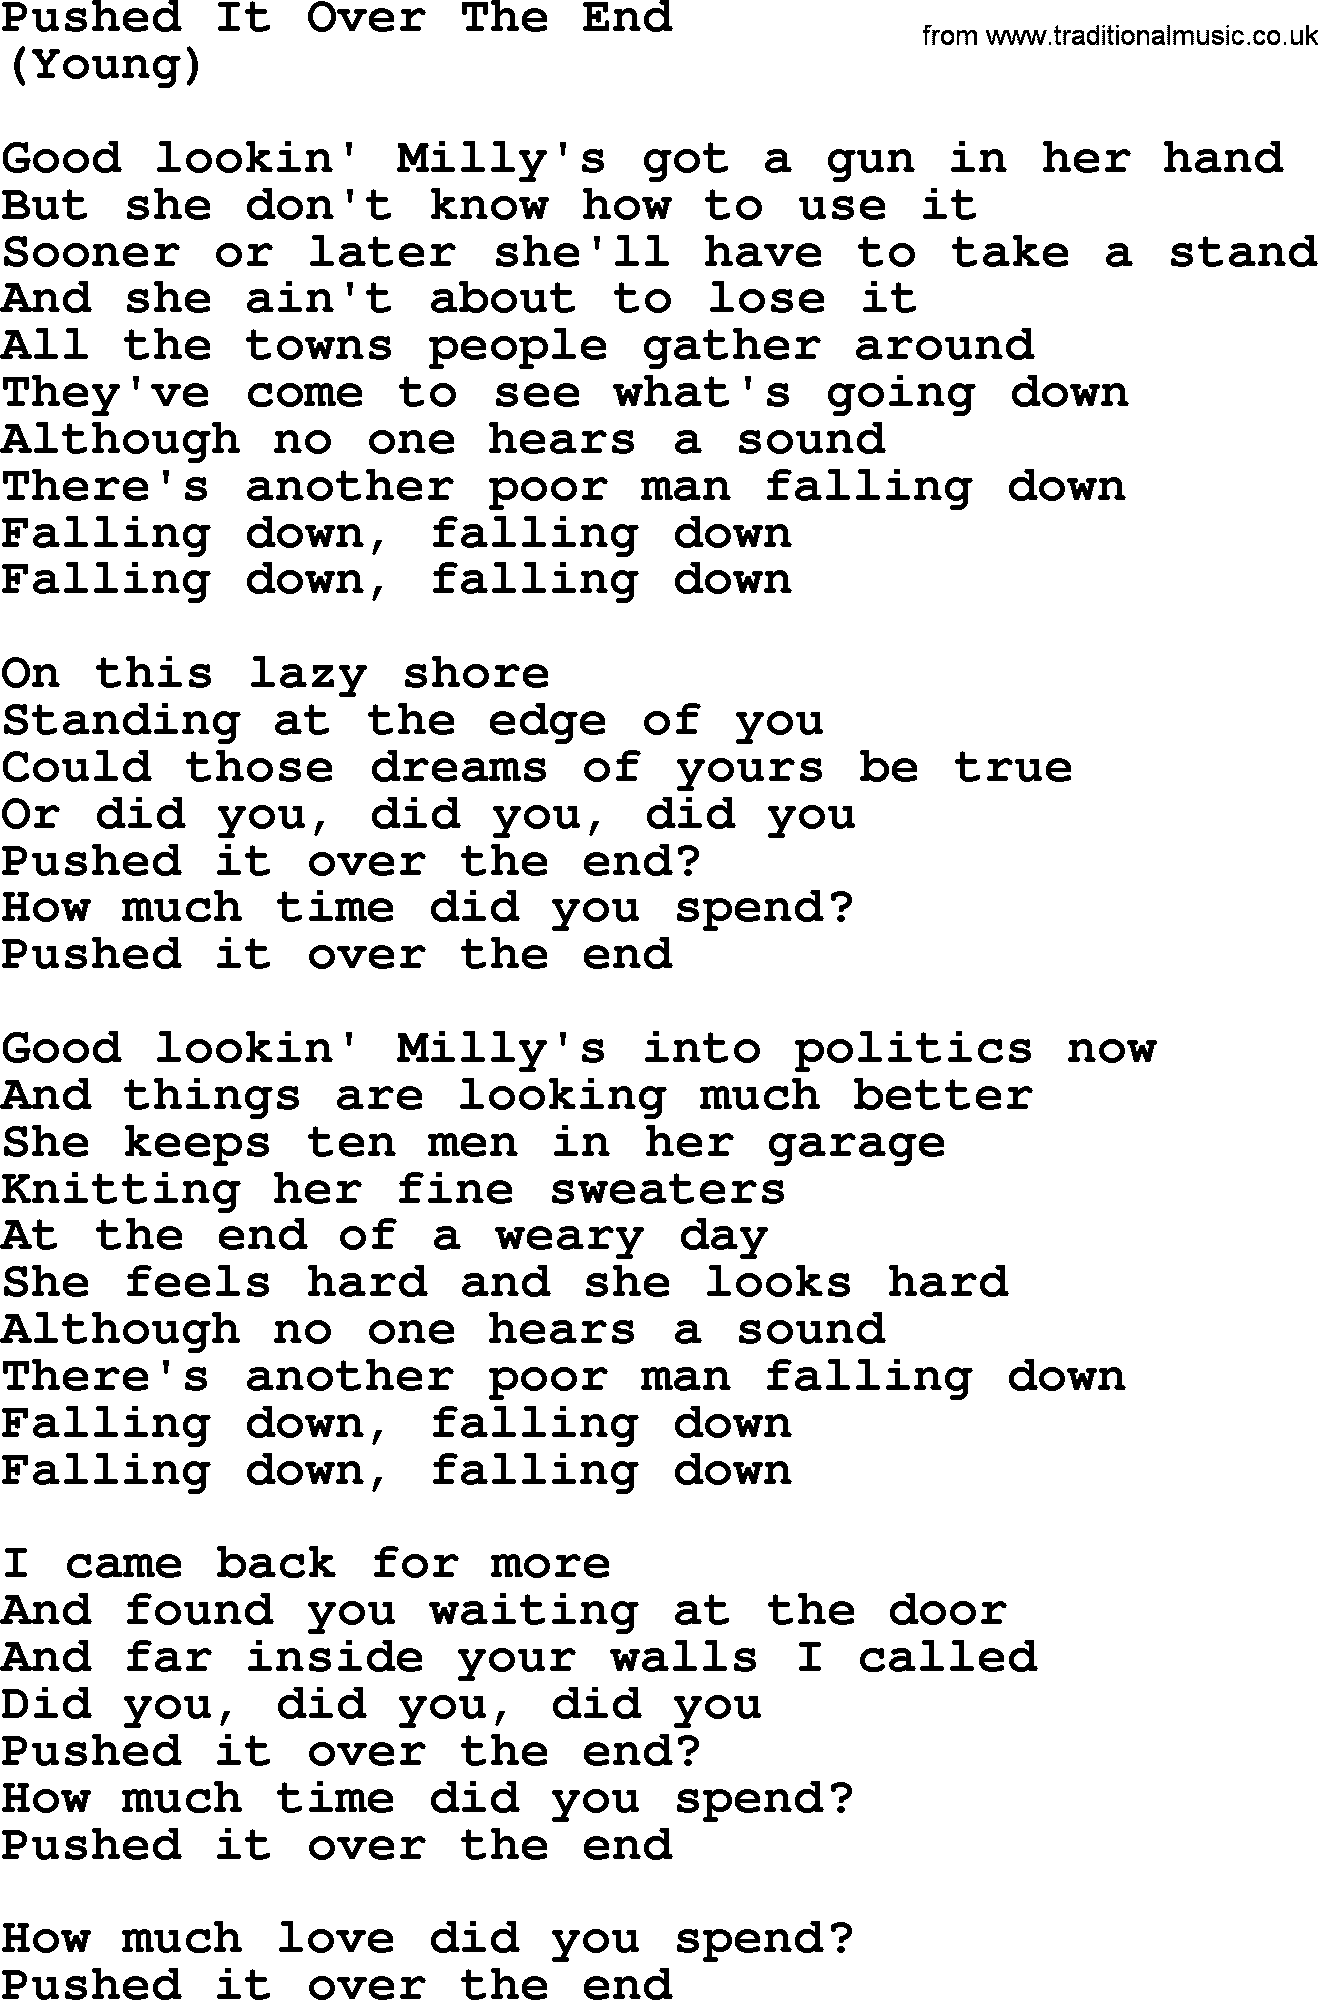 The Byrds song Pushed It Over The End, lyrics